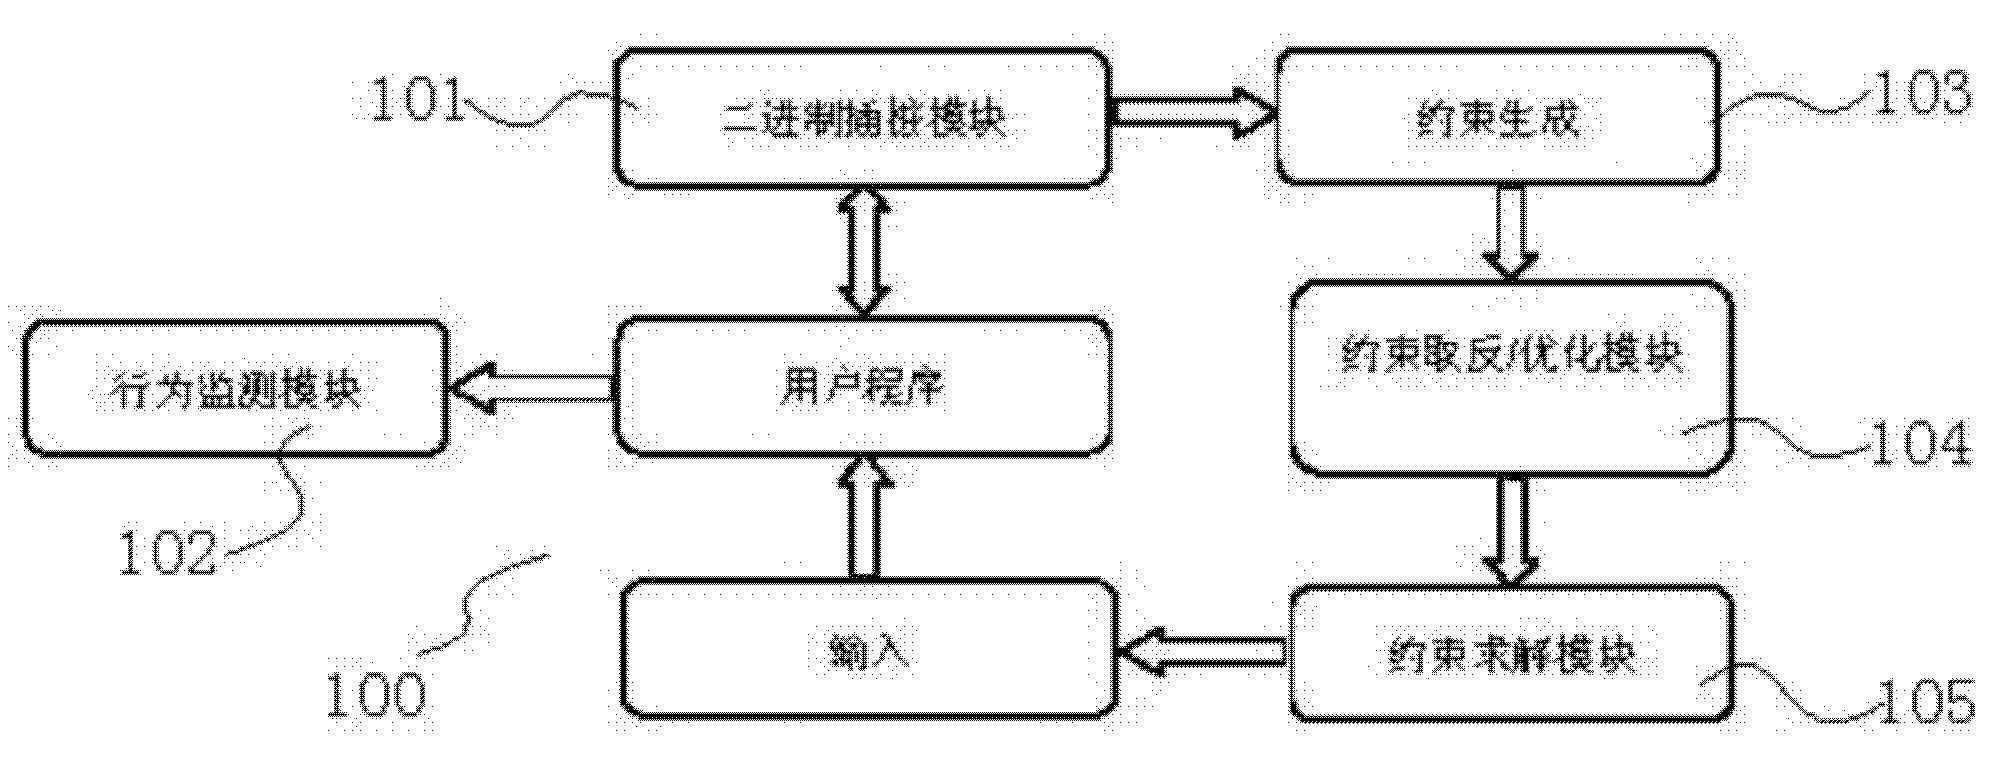 Software behavior detection system based on symbolic execution technology and detection method thereof